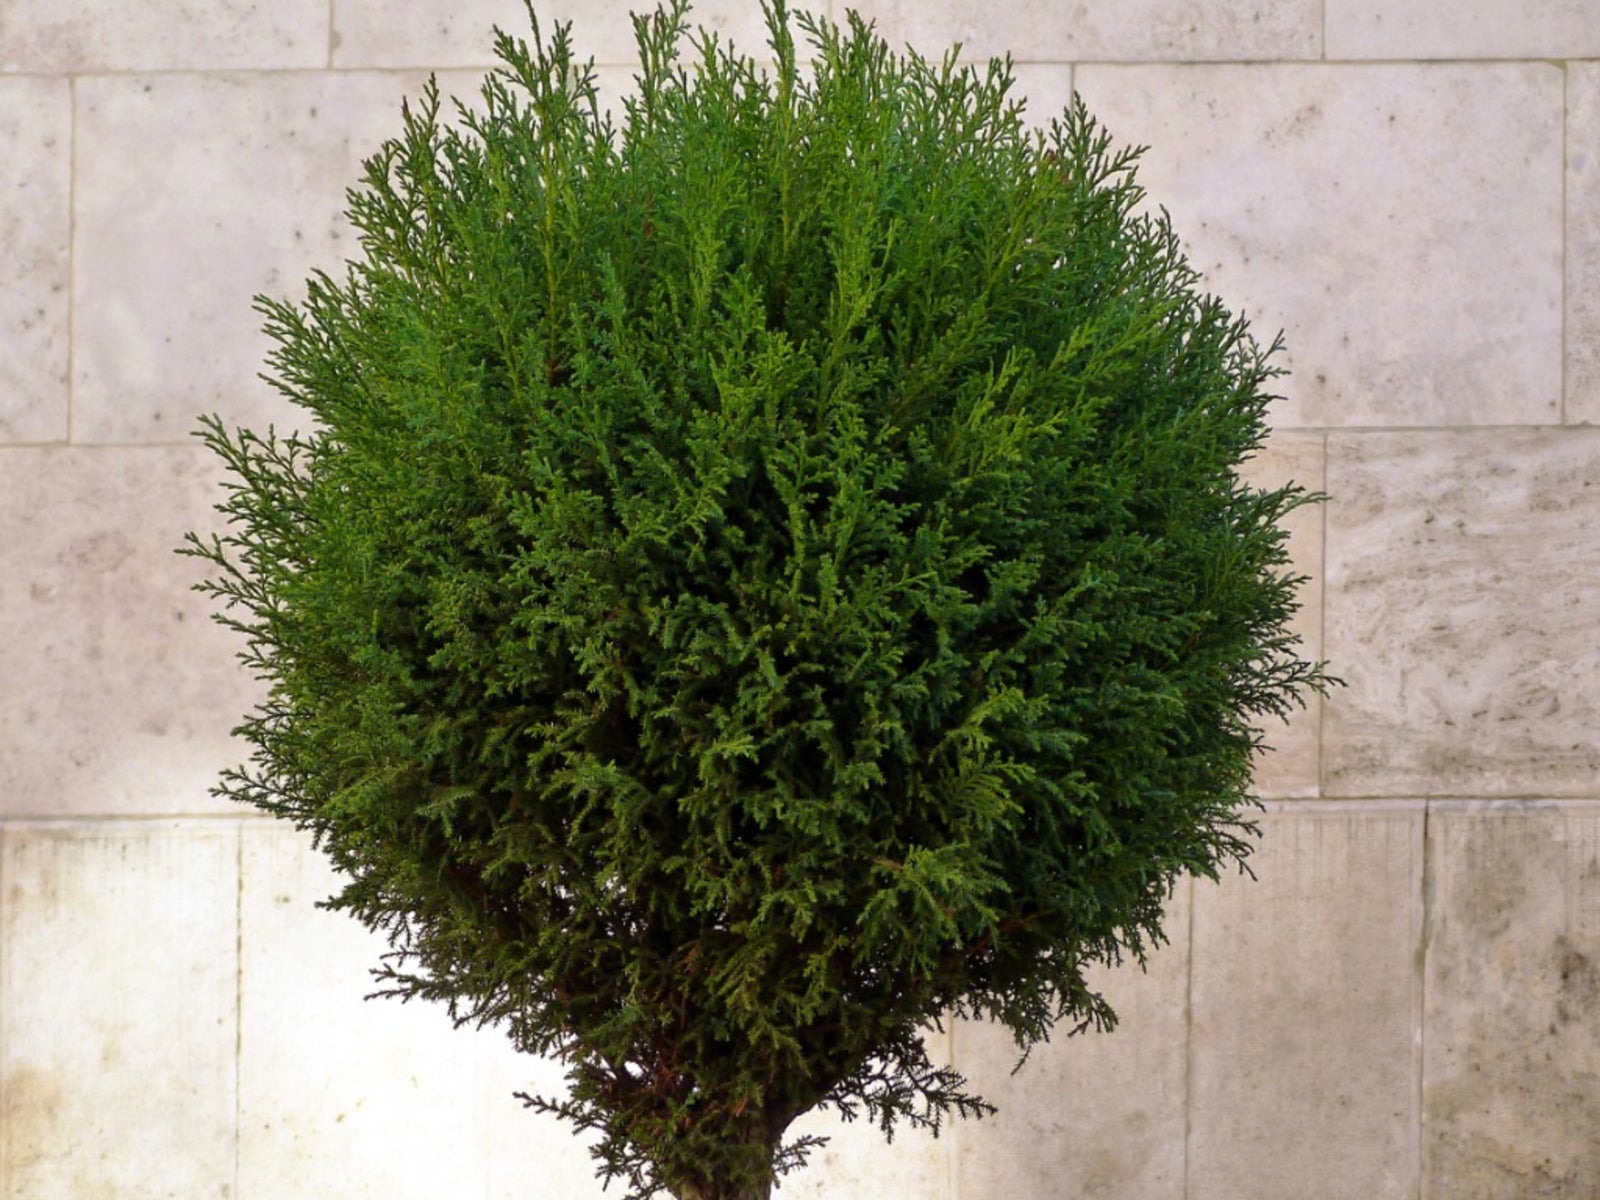 Care Of Juniper Shrubbery - Tips For Growing Junipers